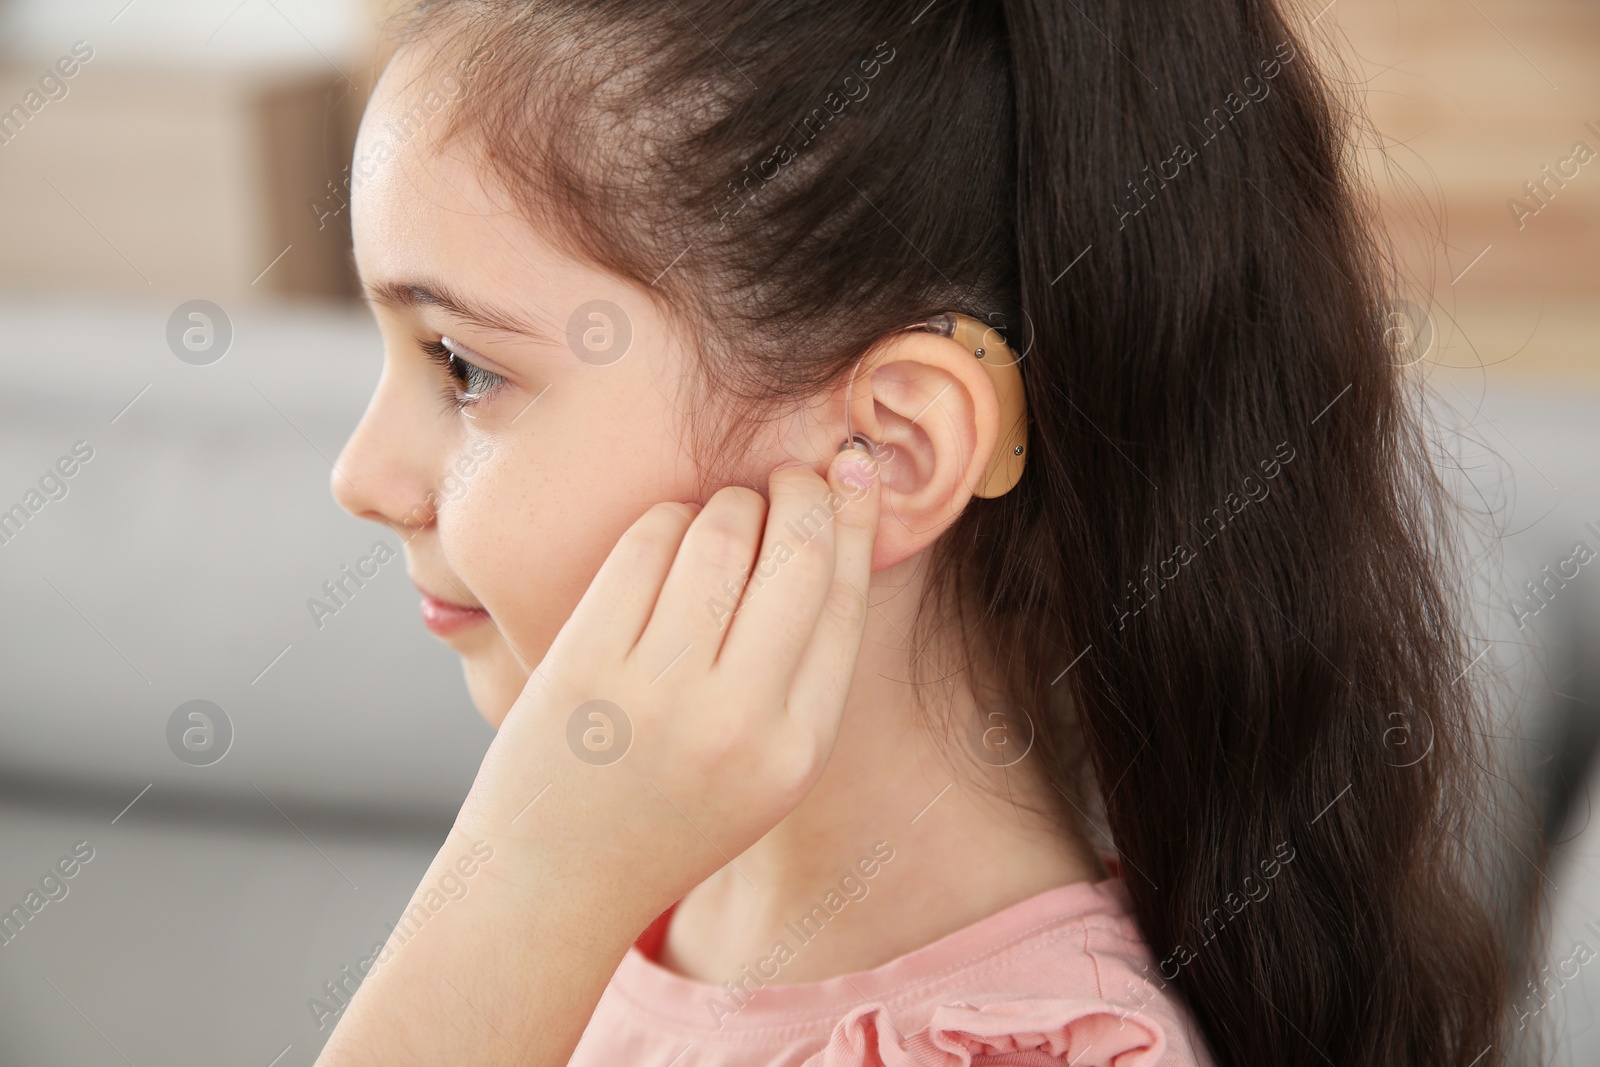 Photo of Little girl adjusting hearing aid at home